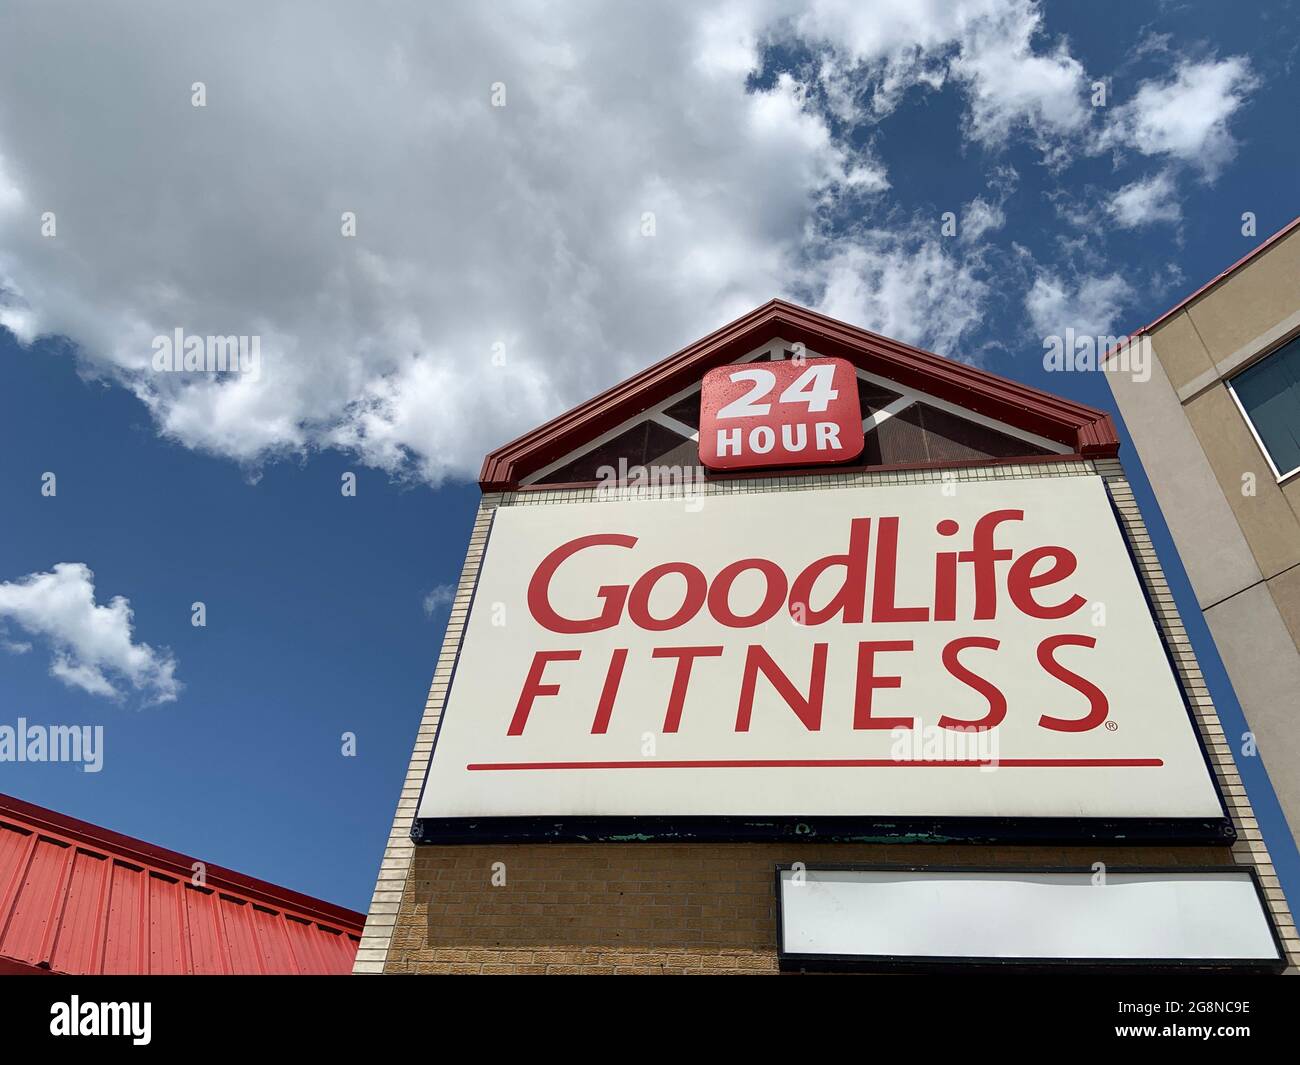 A sign on a building with Goodlife Fitness and blue sky background. Goodlife Fitness is a 24 hr gym and health club. Stock Photo